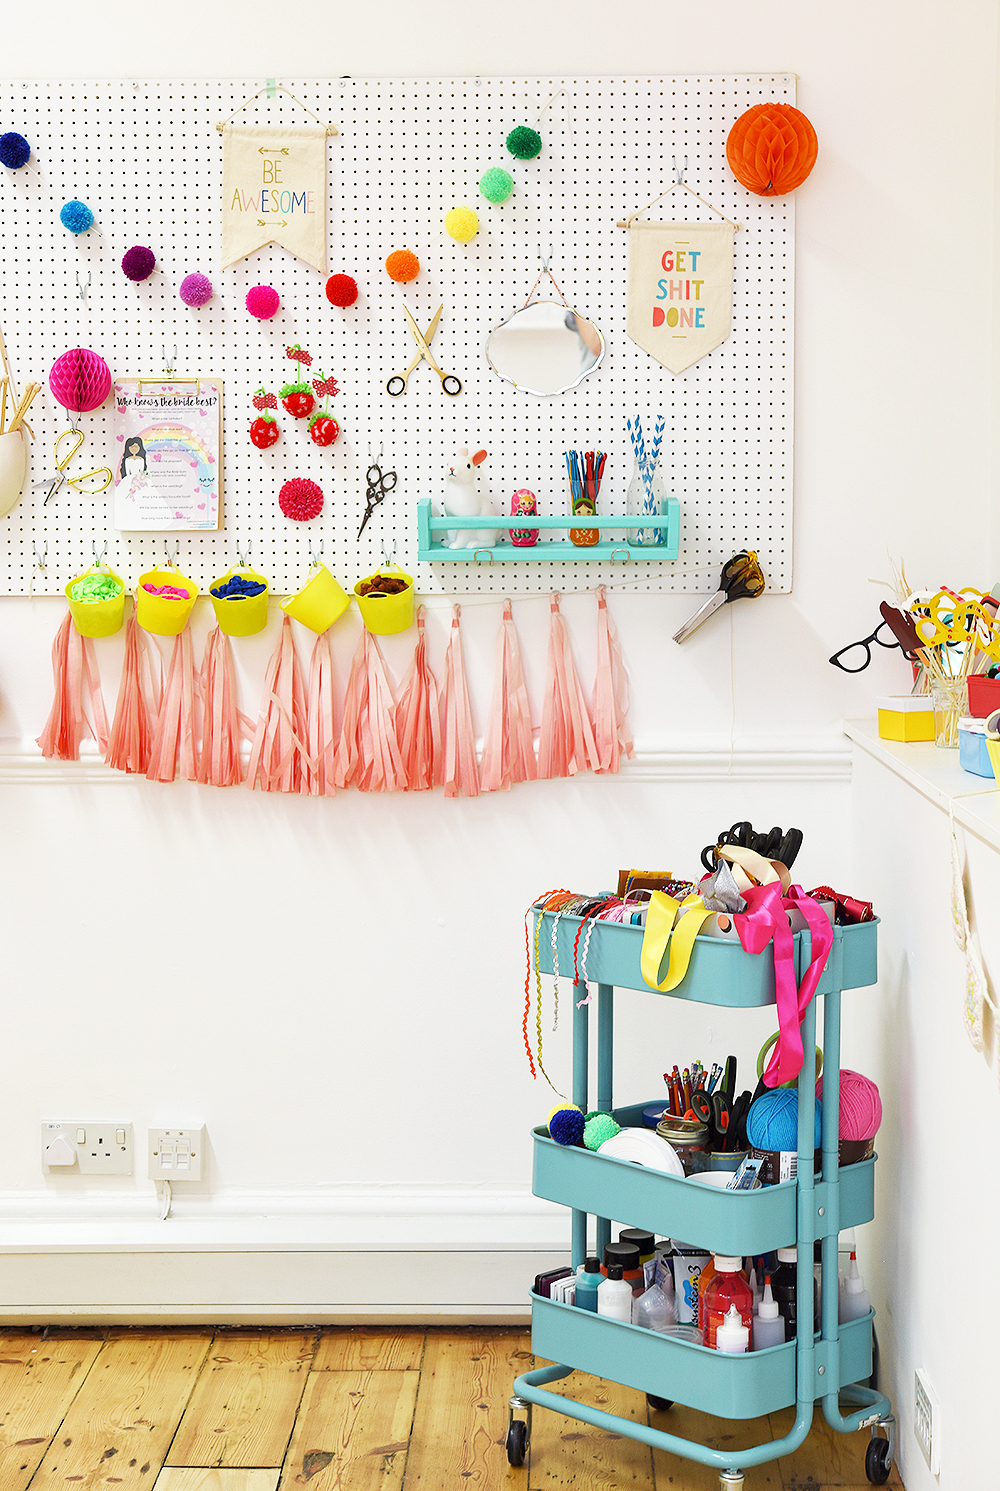 Ikea Trolley Packed with Craft Tools in front of beautiful white pegboard